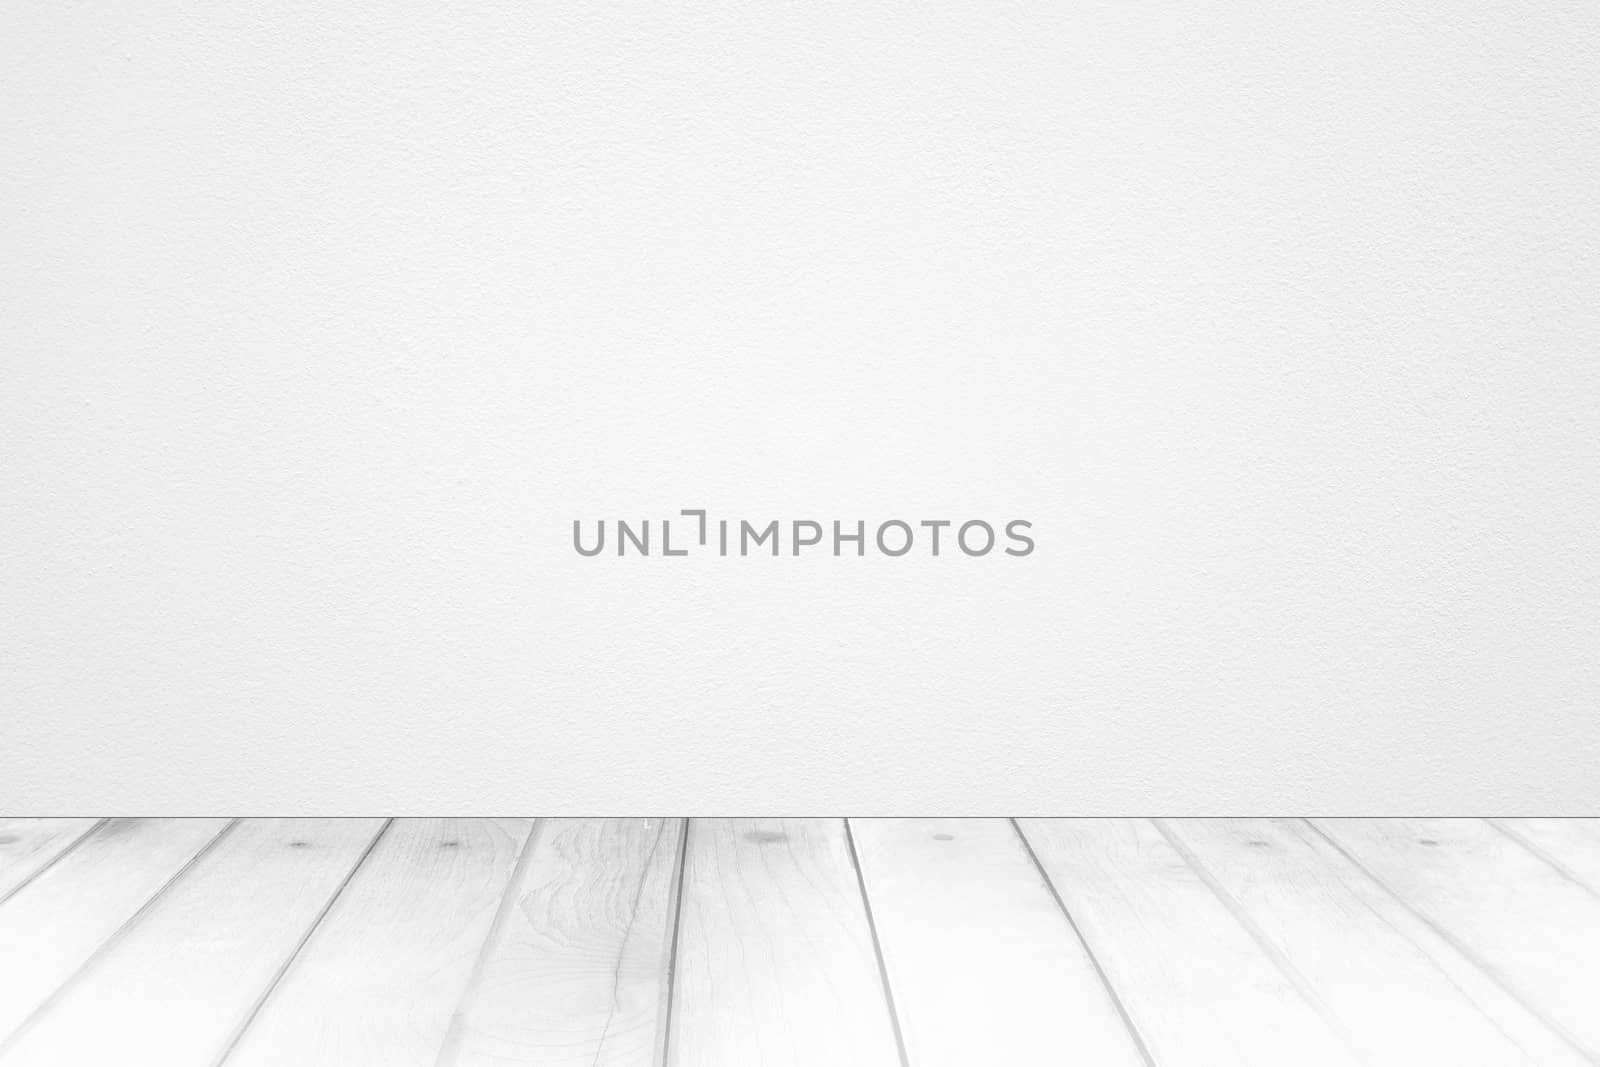 Abstract White Concrete Room Background with White Wooden Pavement.